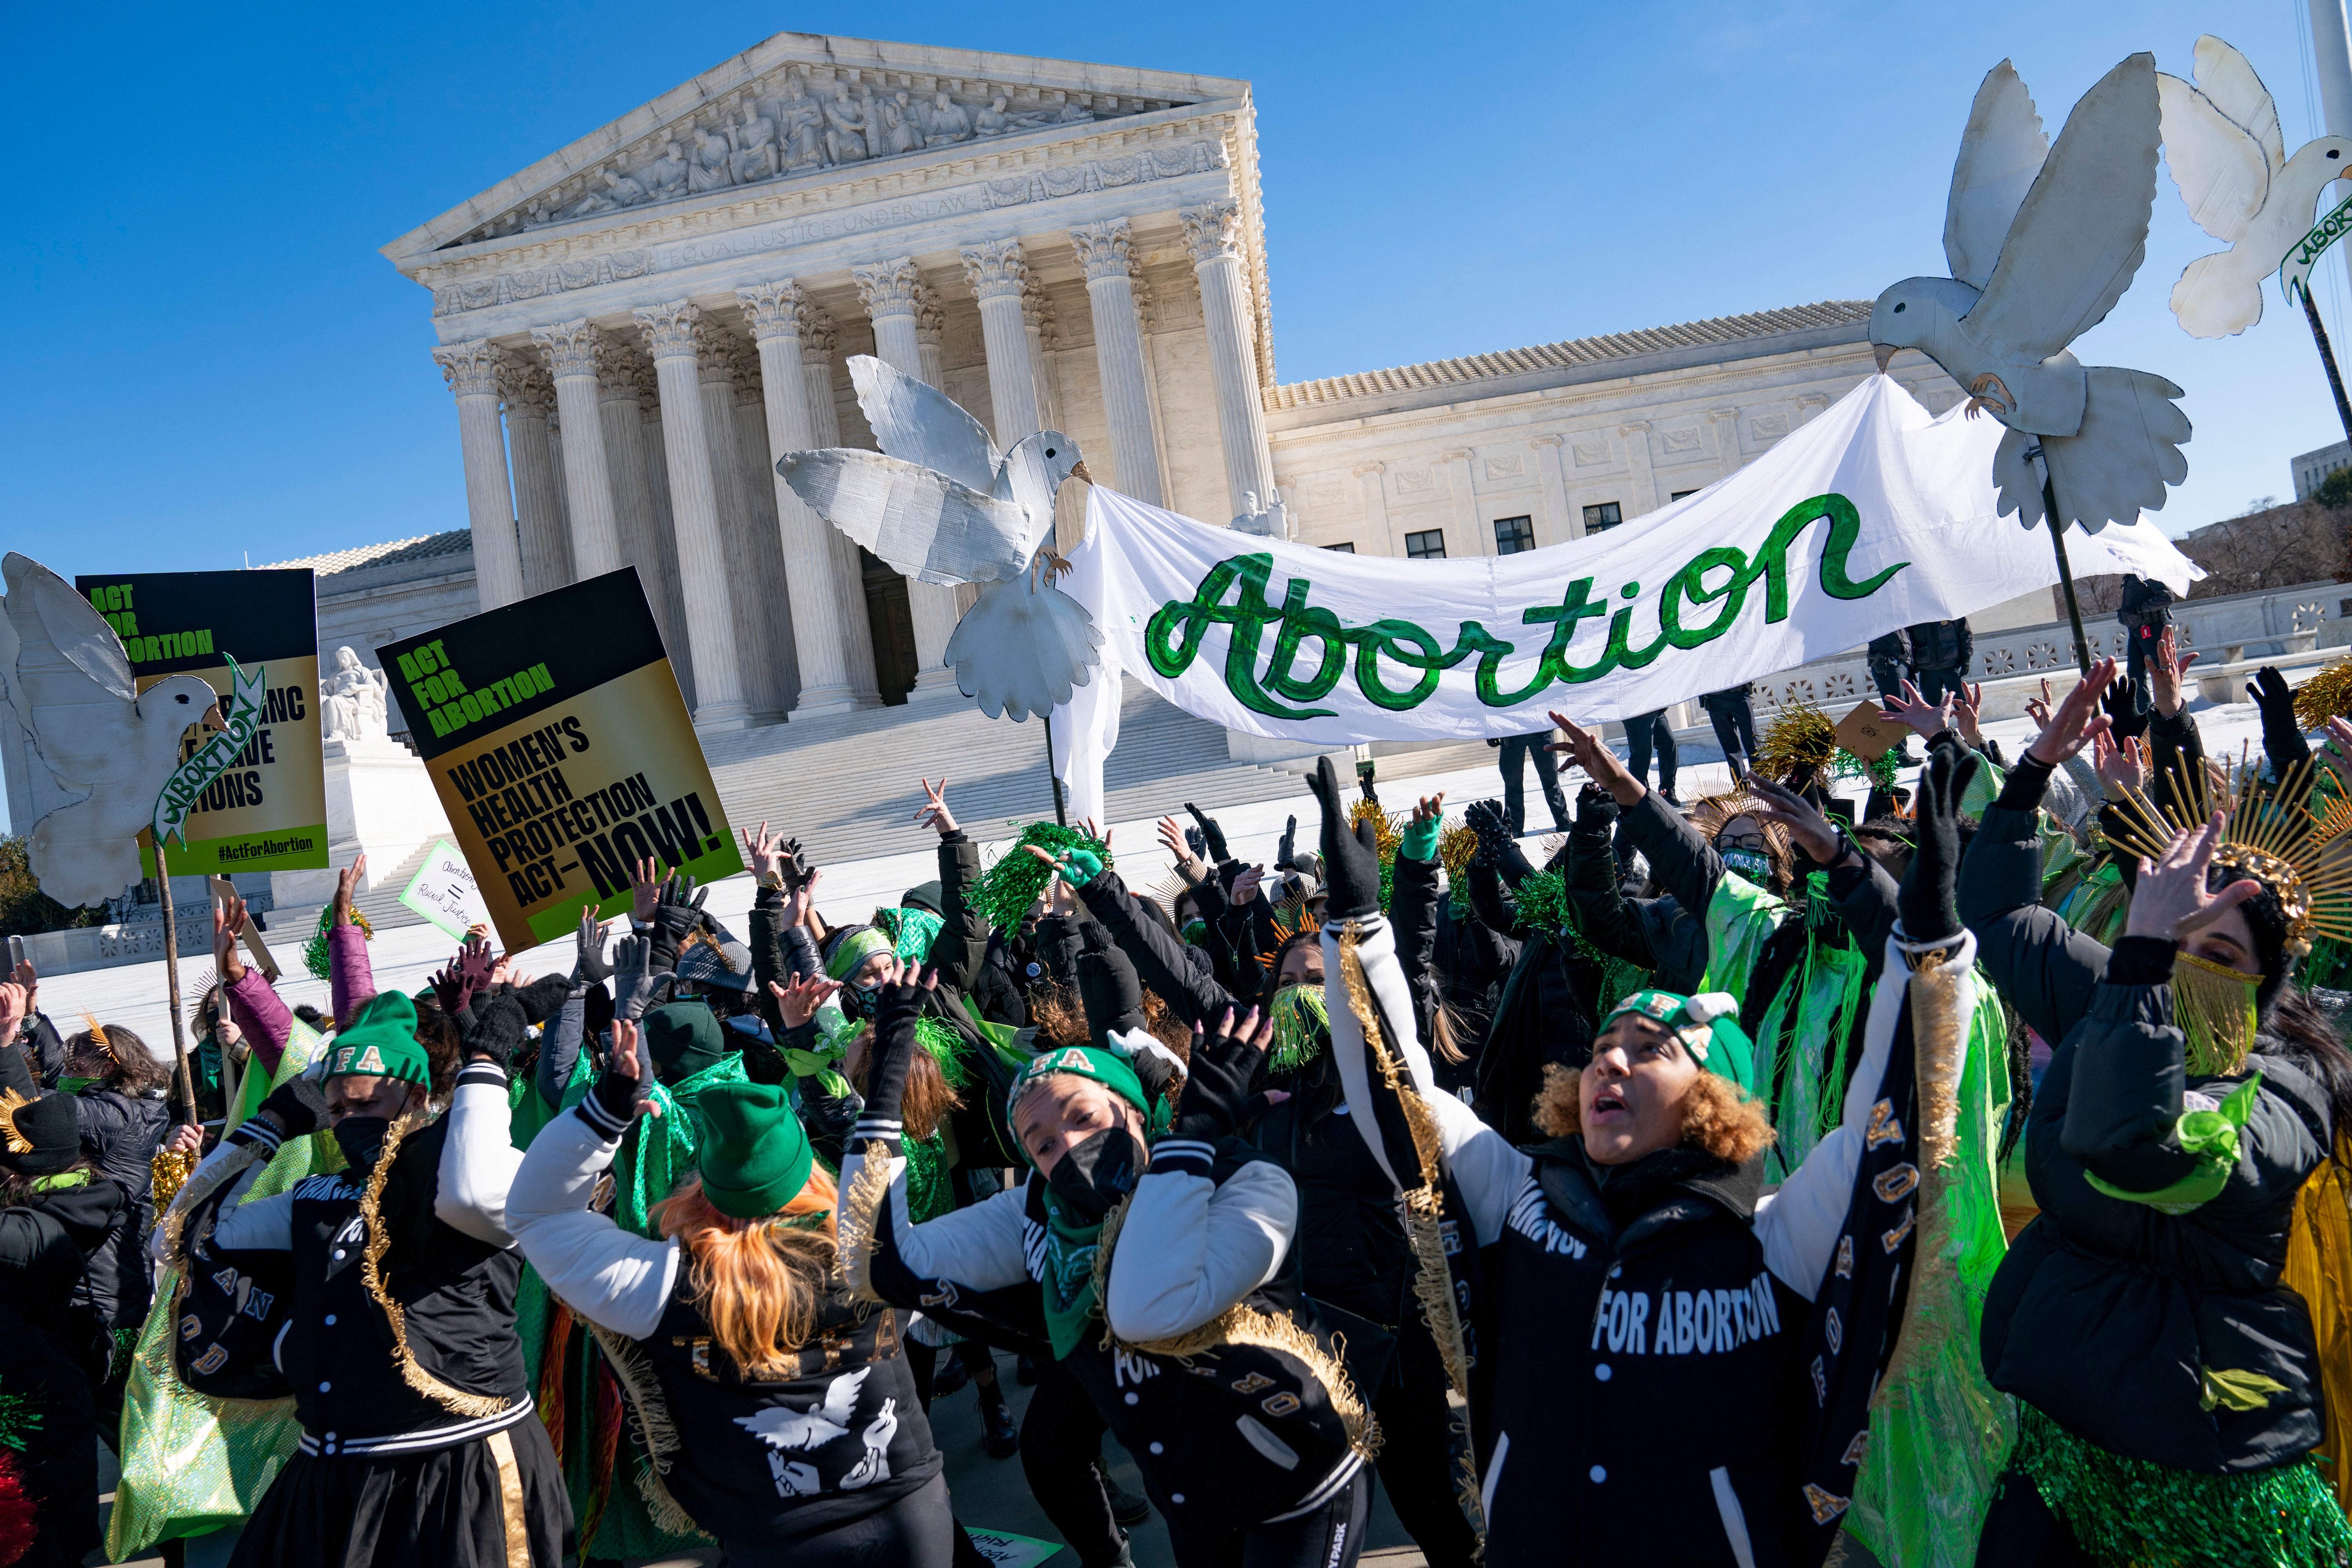 Demonstrators wearing green hold up a banner that reads “Abortion” in front of the Supreme Court building.